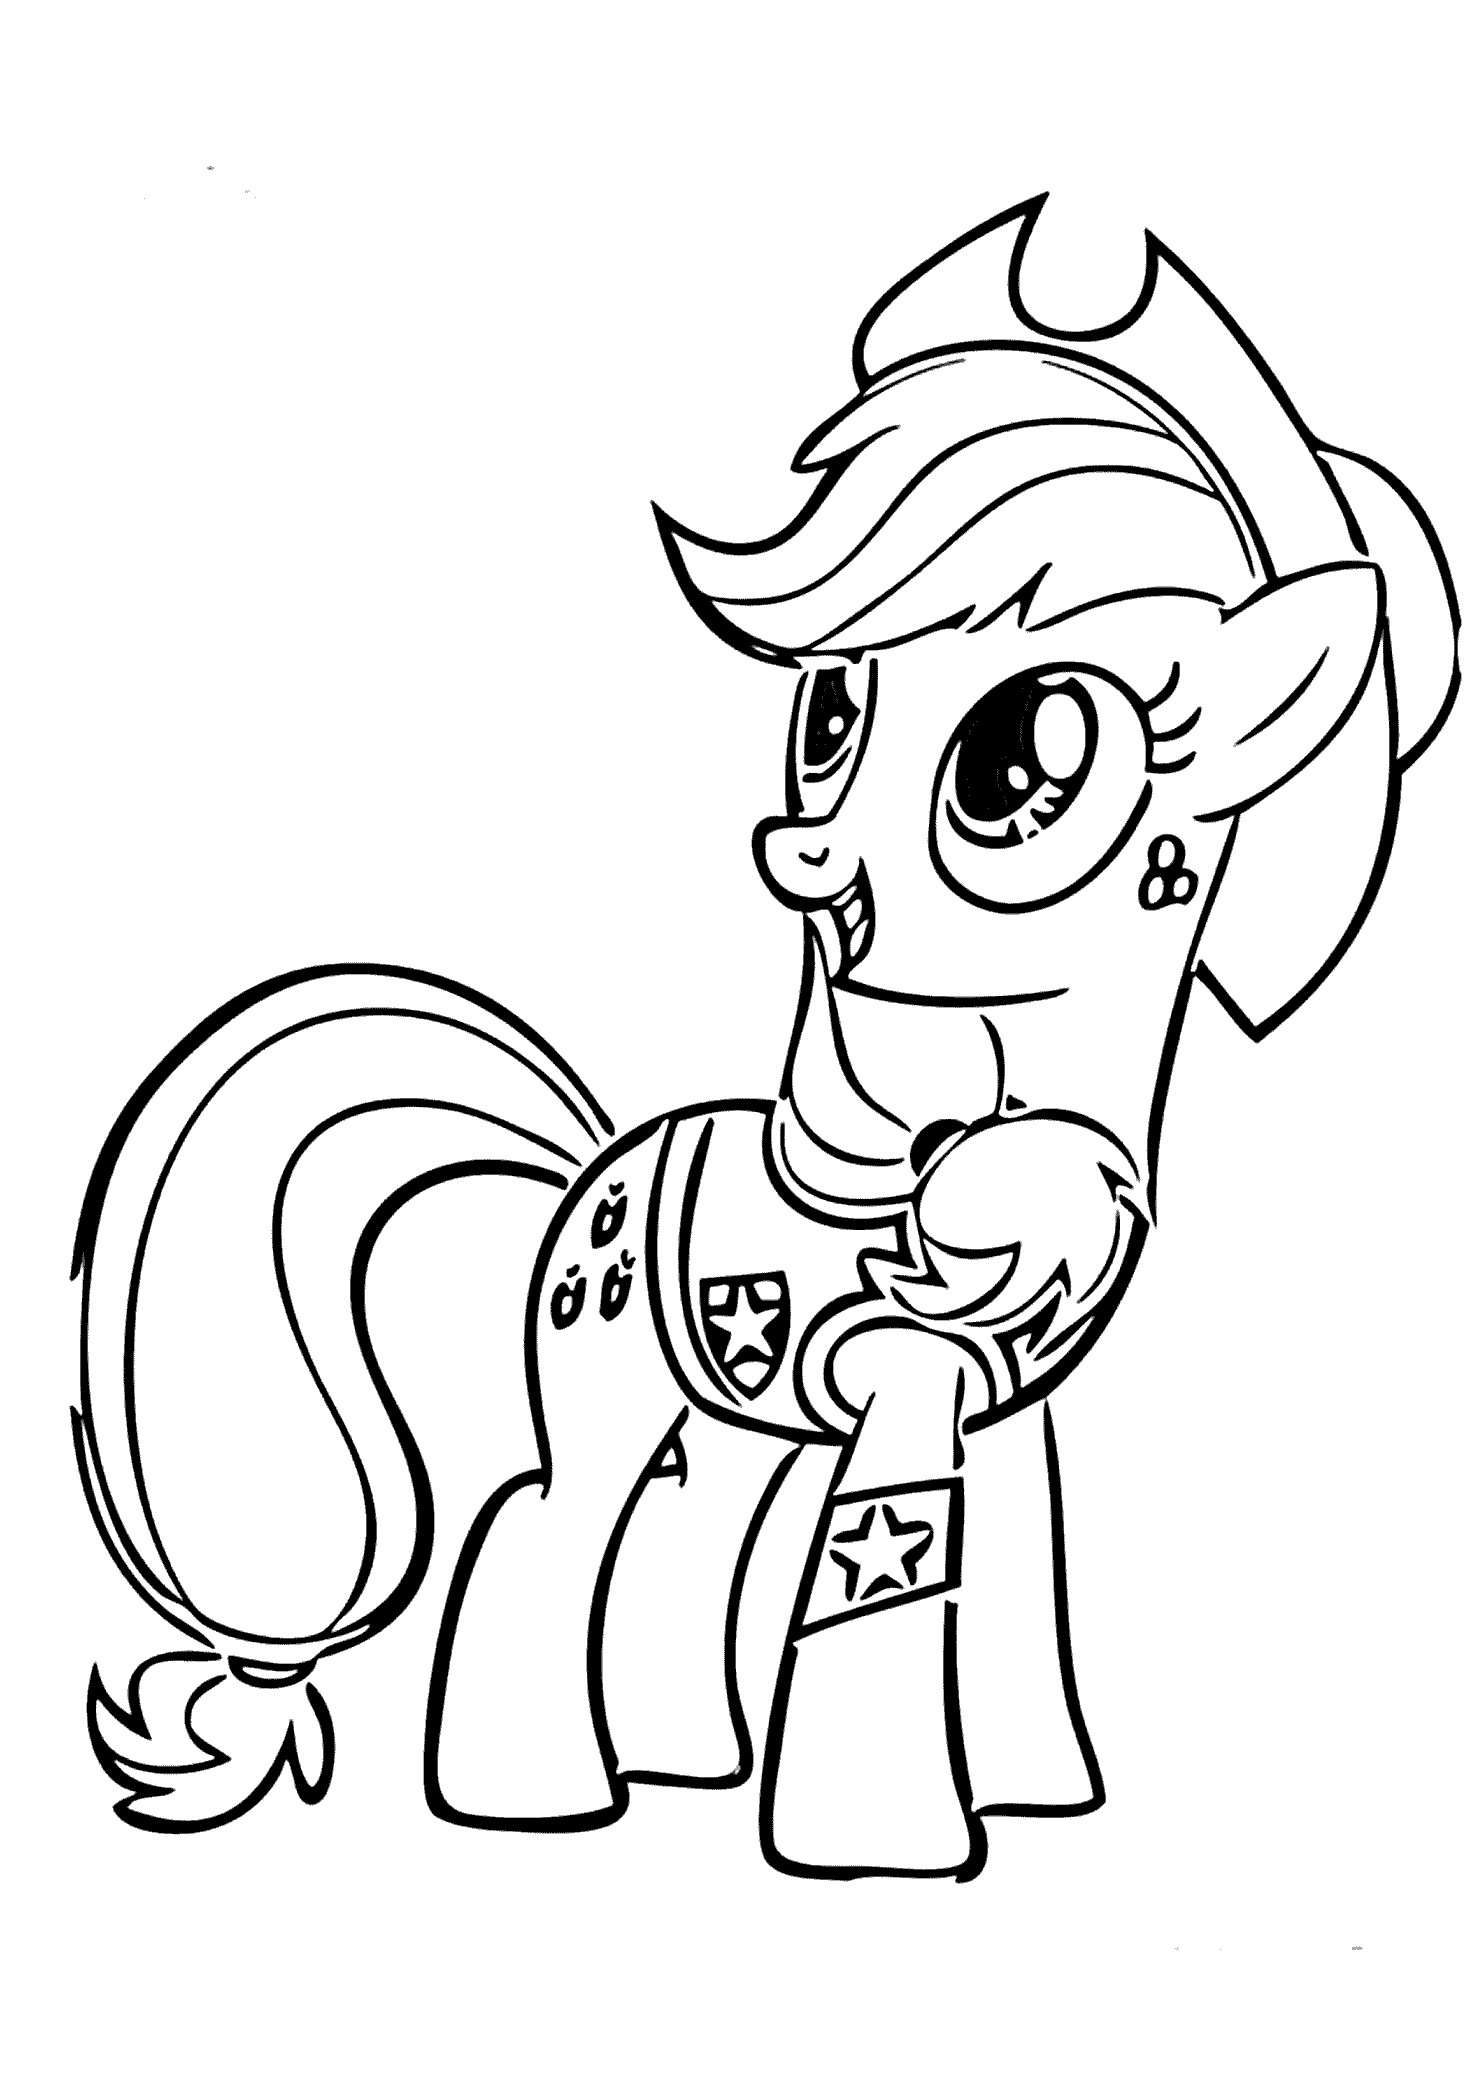 Coloring Pages For Kids My Little Pony
 My Little Pony coloring pages for kids printable free